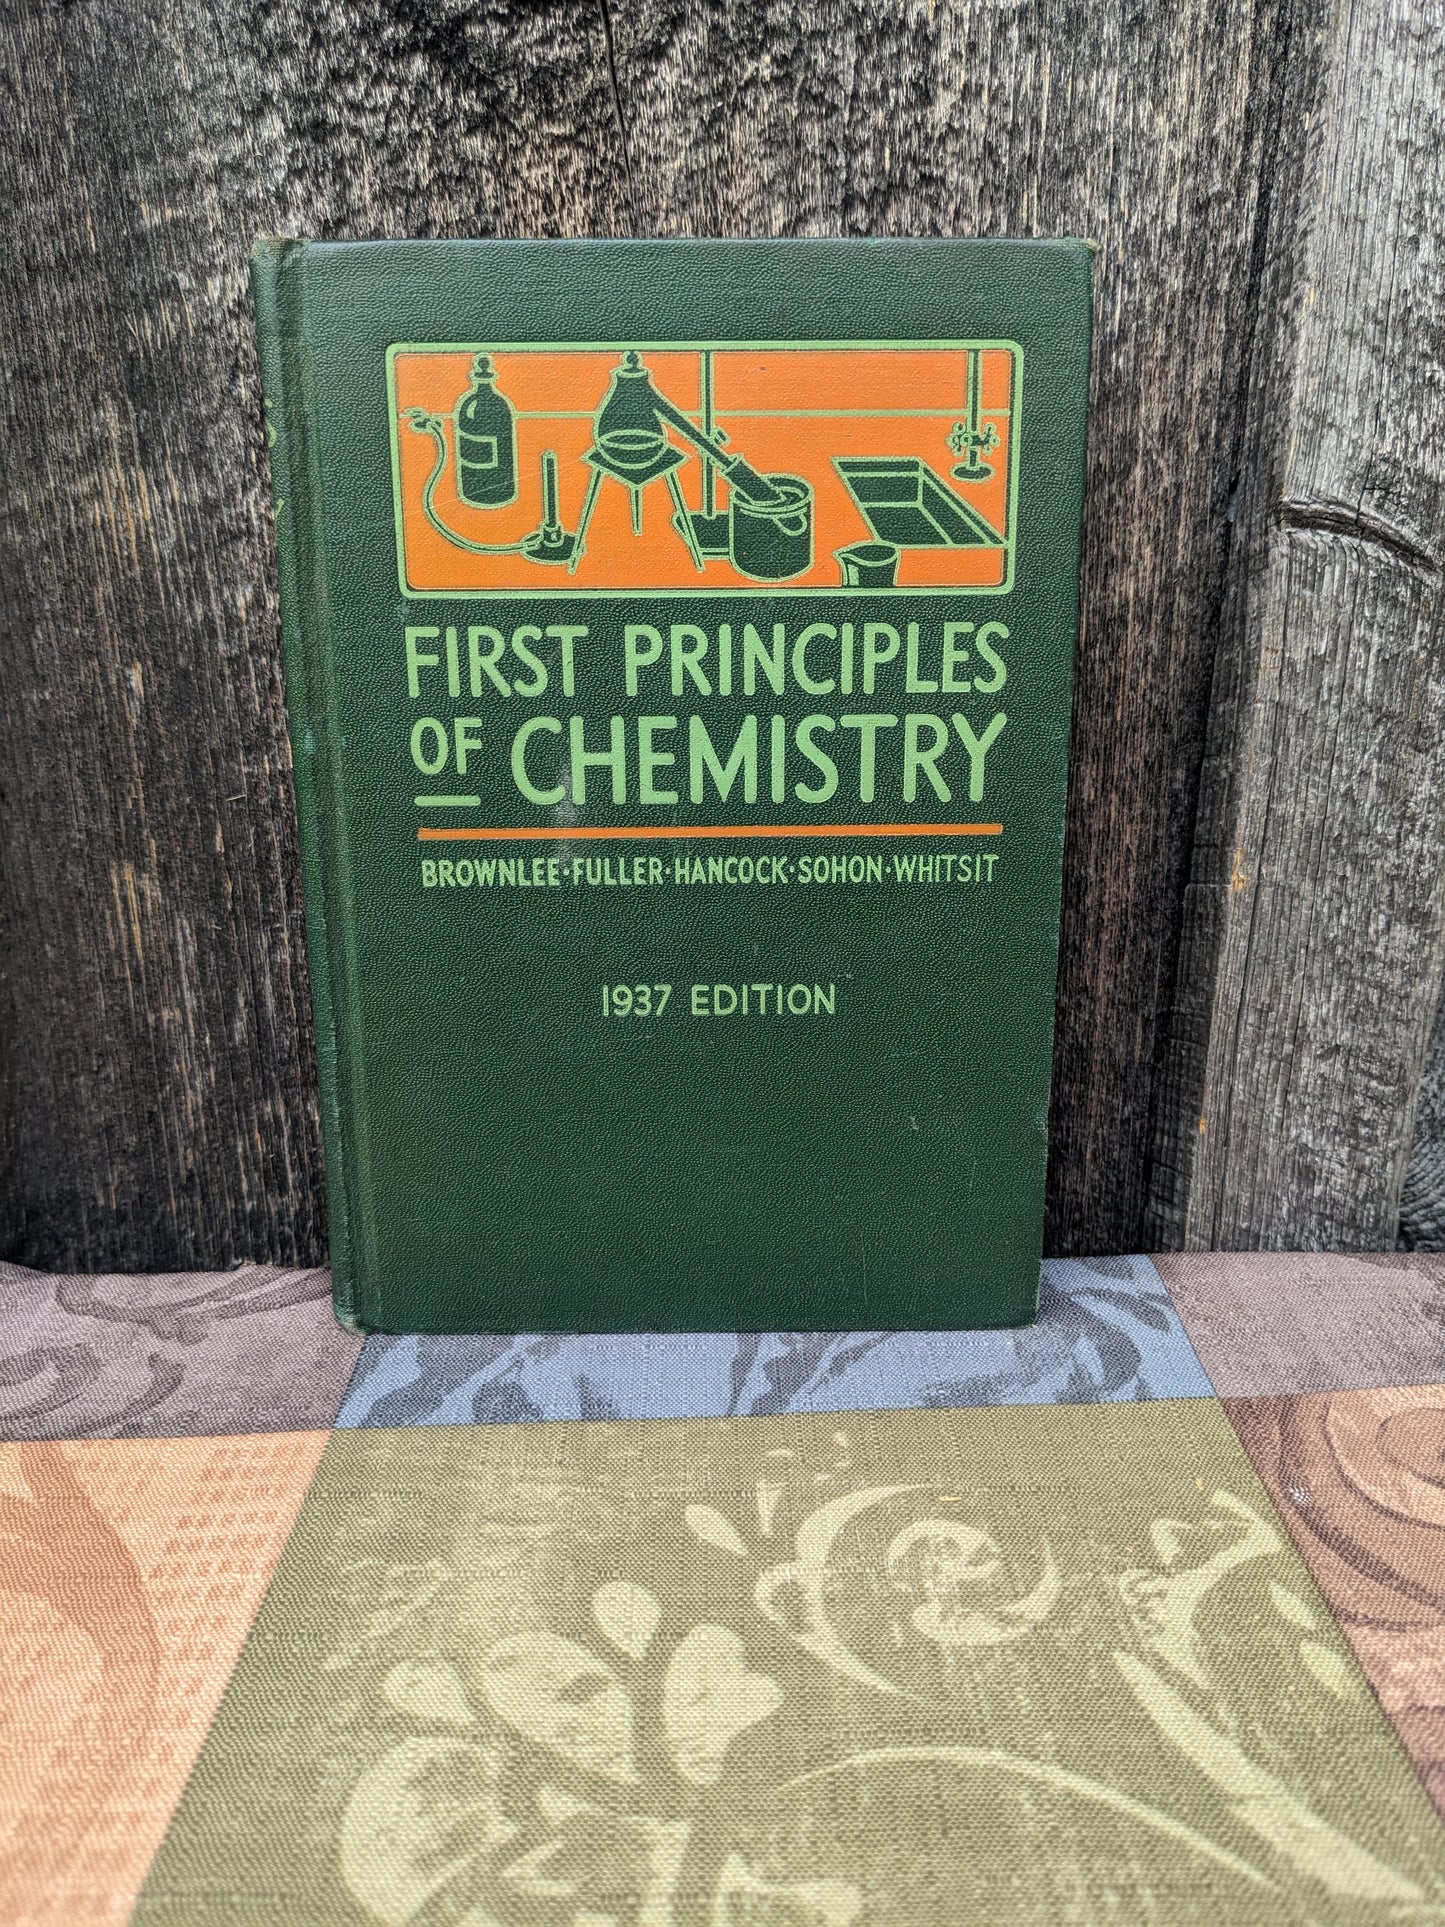 Vintage Copy First Principles of Chemistry, 1937 edition, illustrated